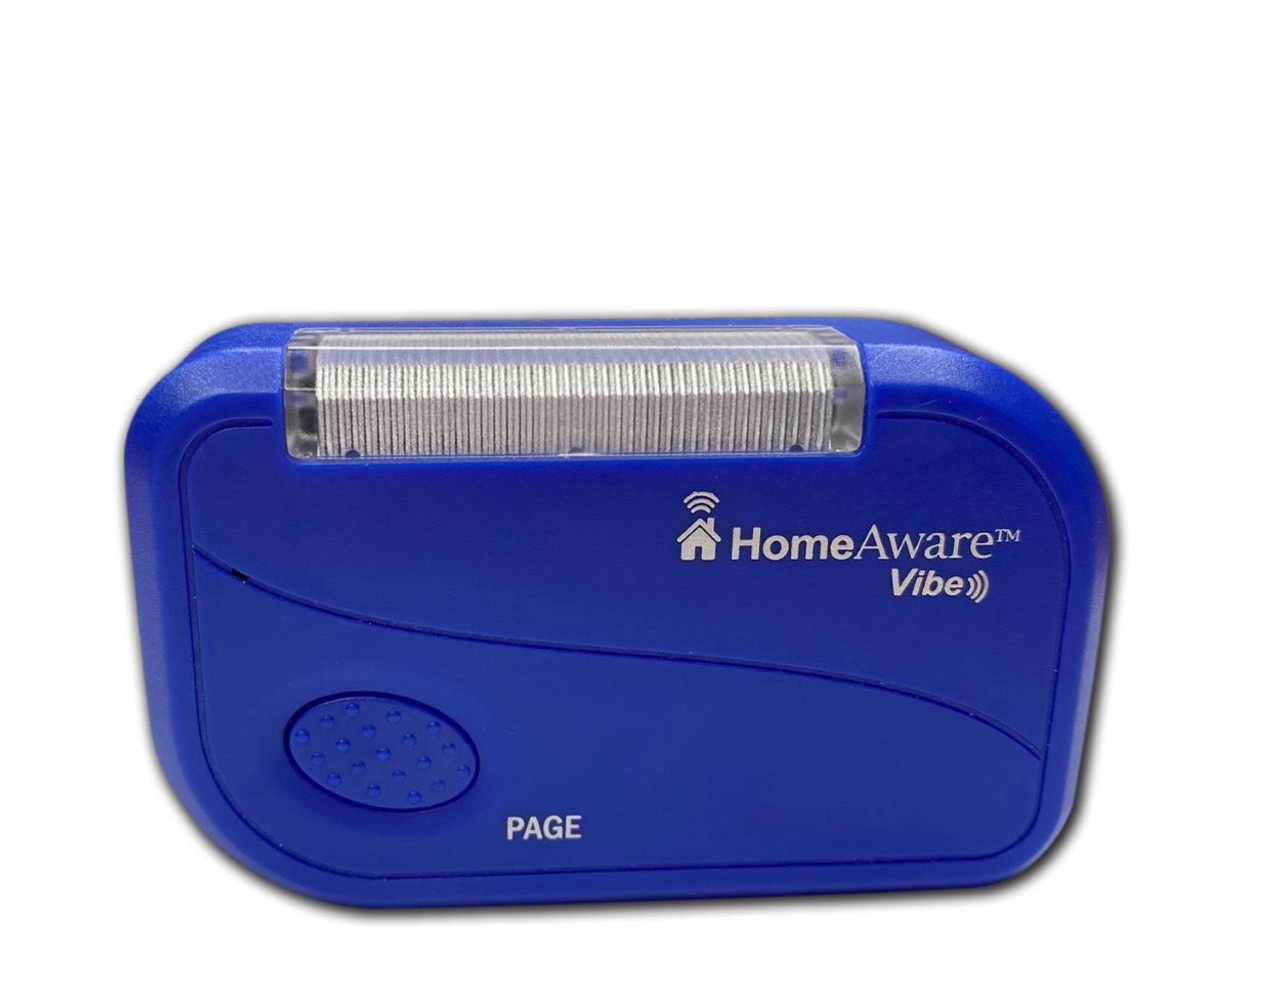 Image: Home aware vibe receiver and pager